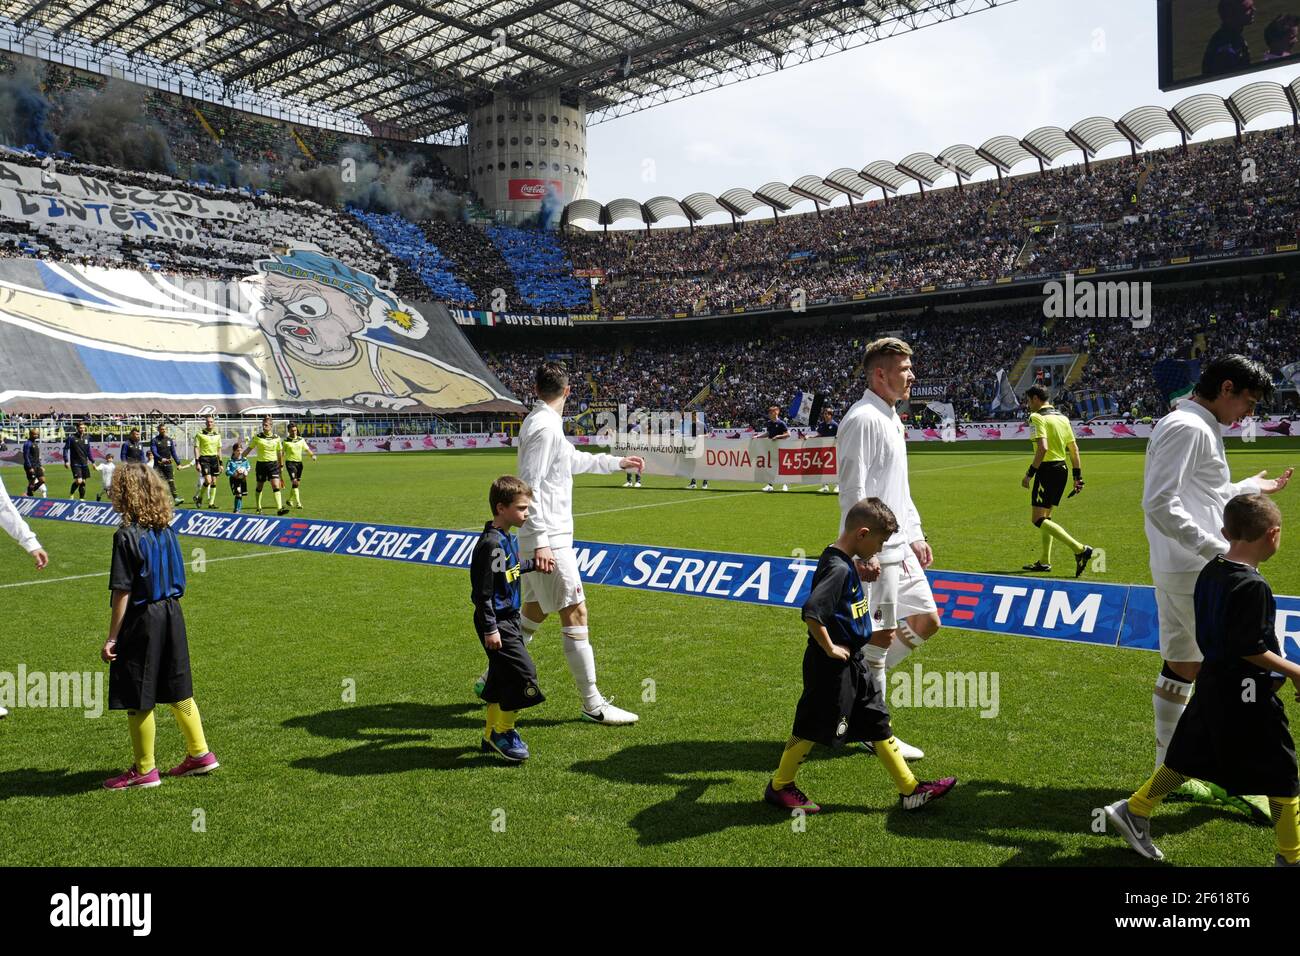 Football players enter at the san siro stadium during the milanese derby AC Milan vs FC Internazionale, in Milan. Stock Photo